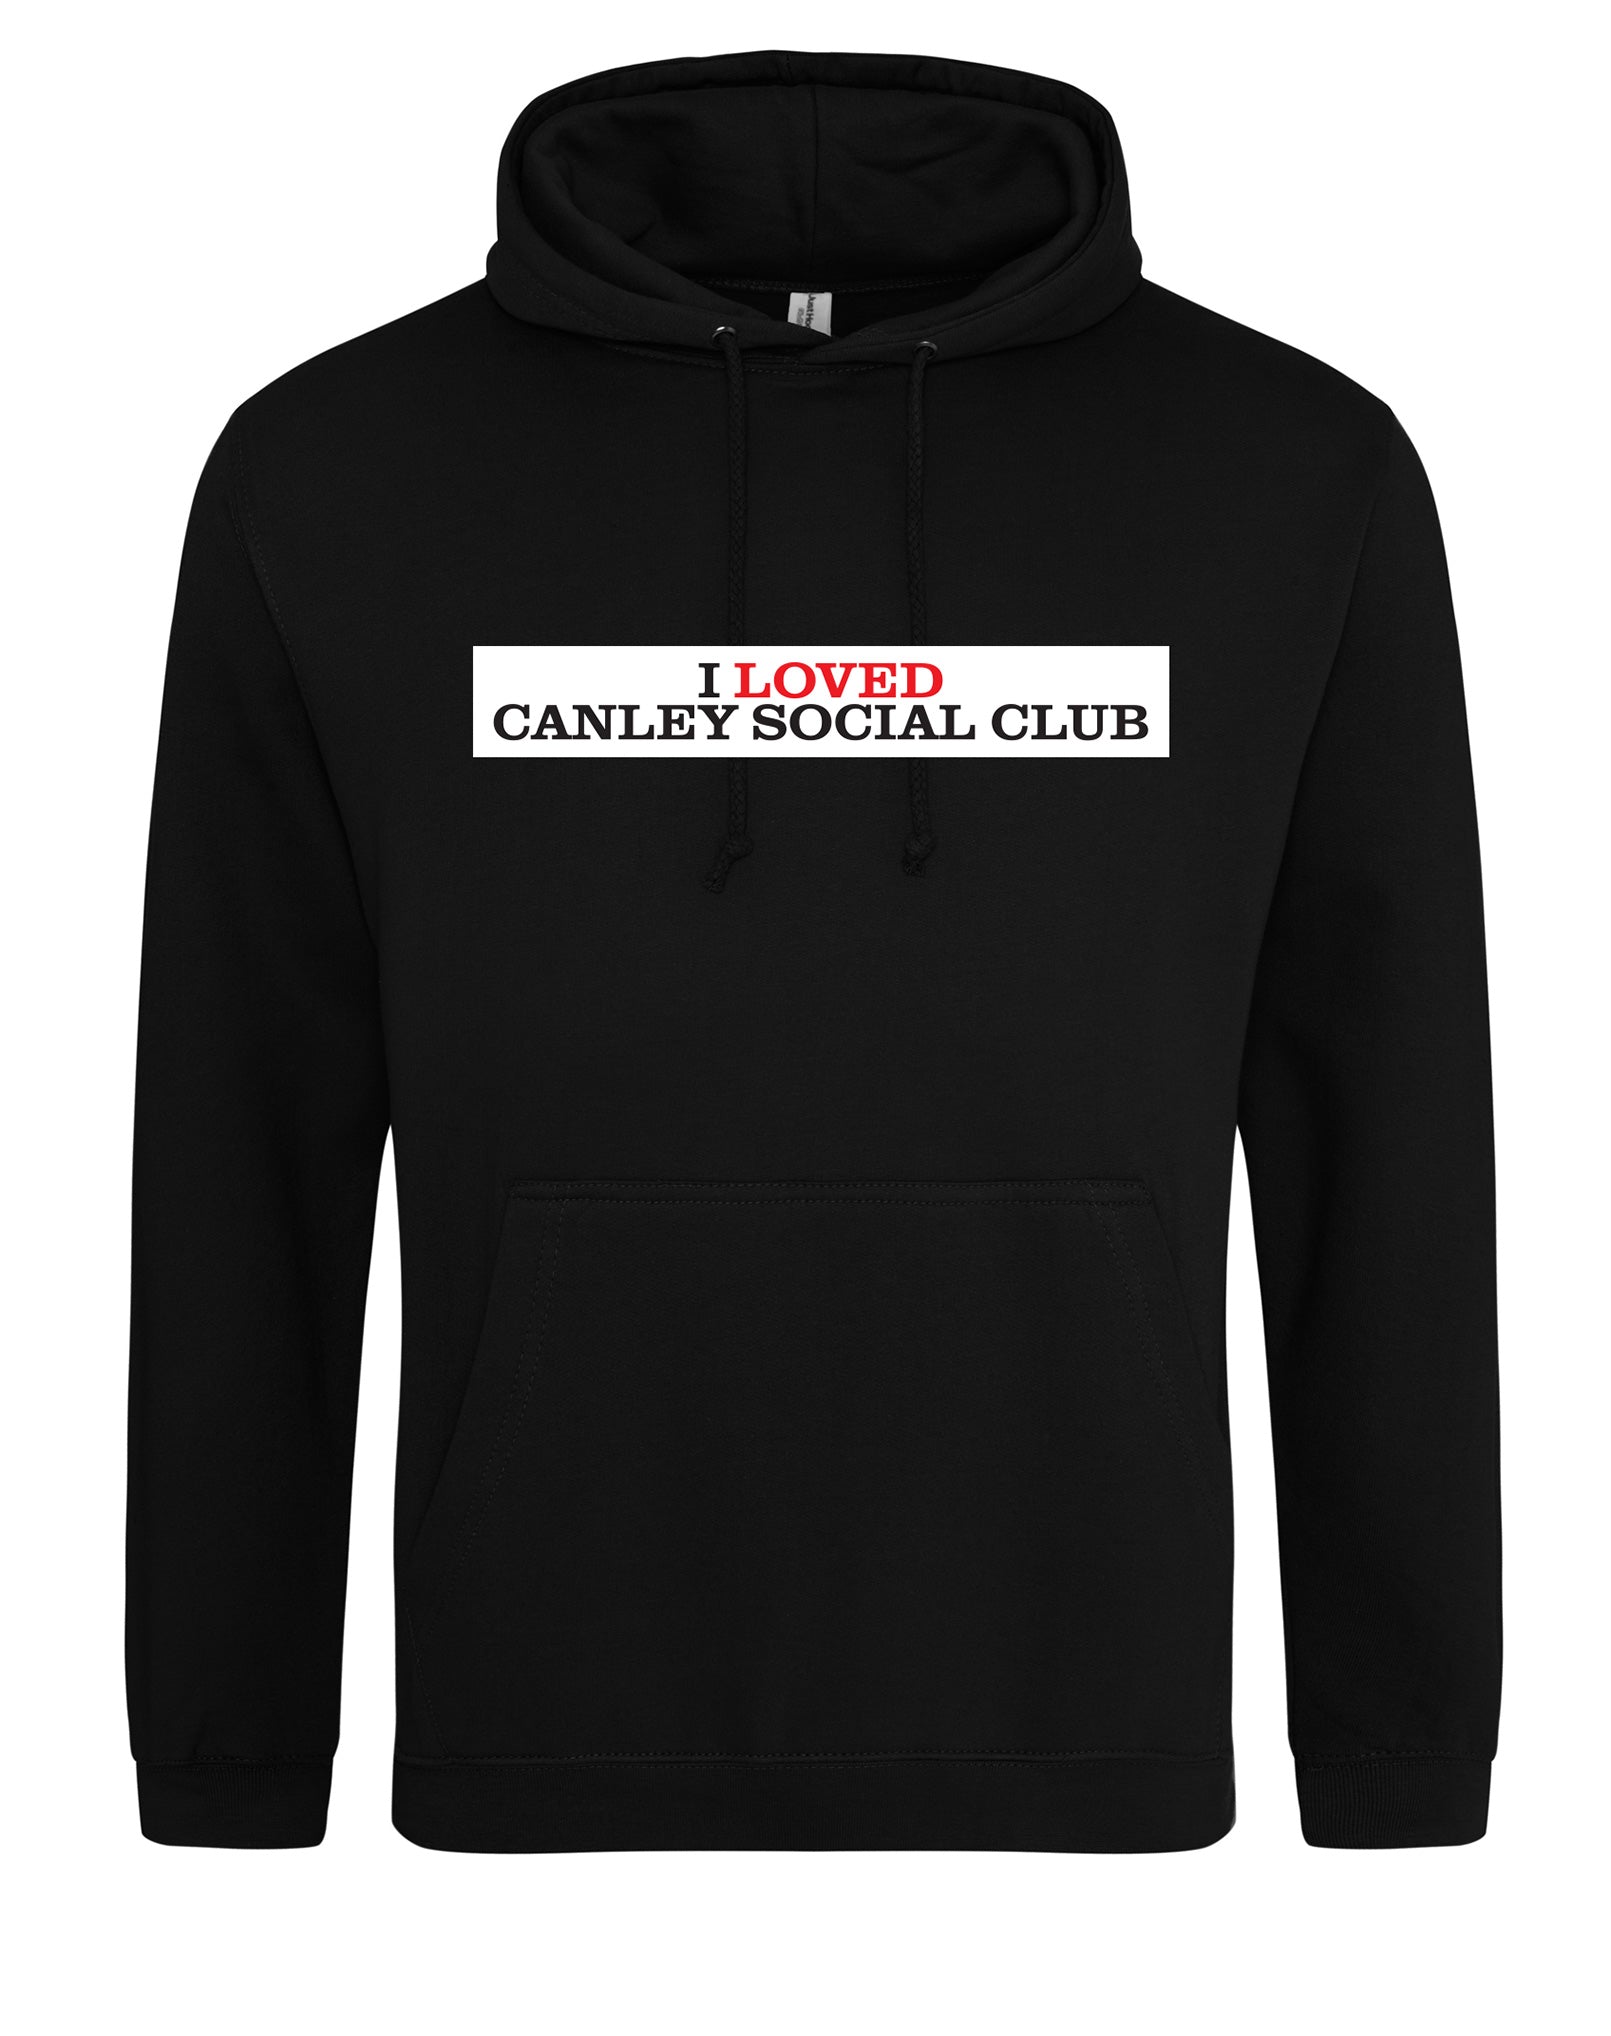 I Loved Canley Social Club unisex fit hoodie - various colours - Dirty Stop Outs